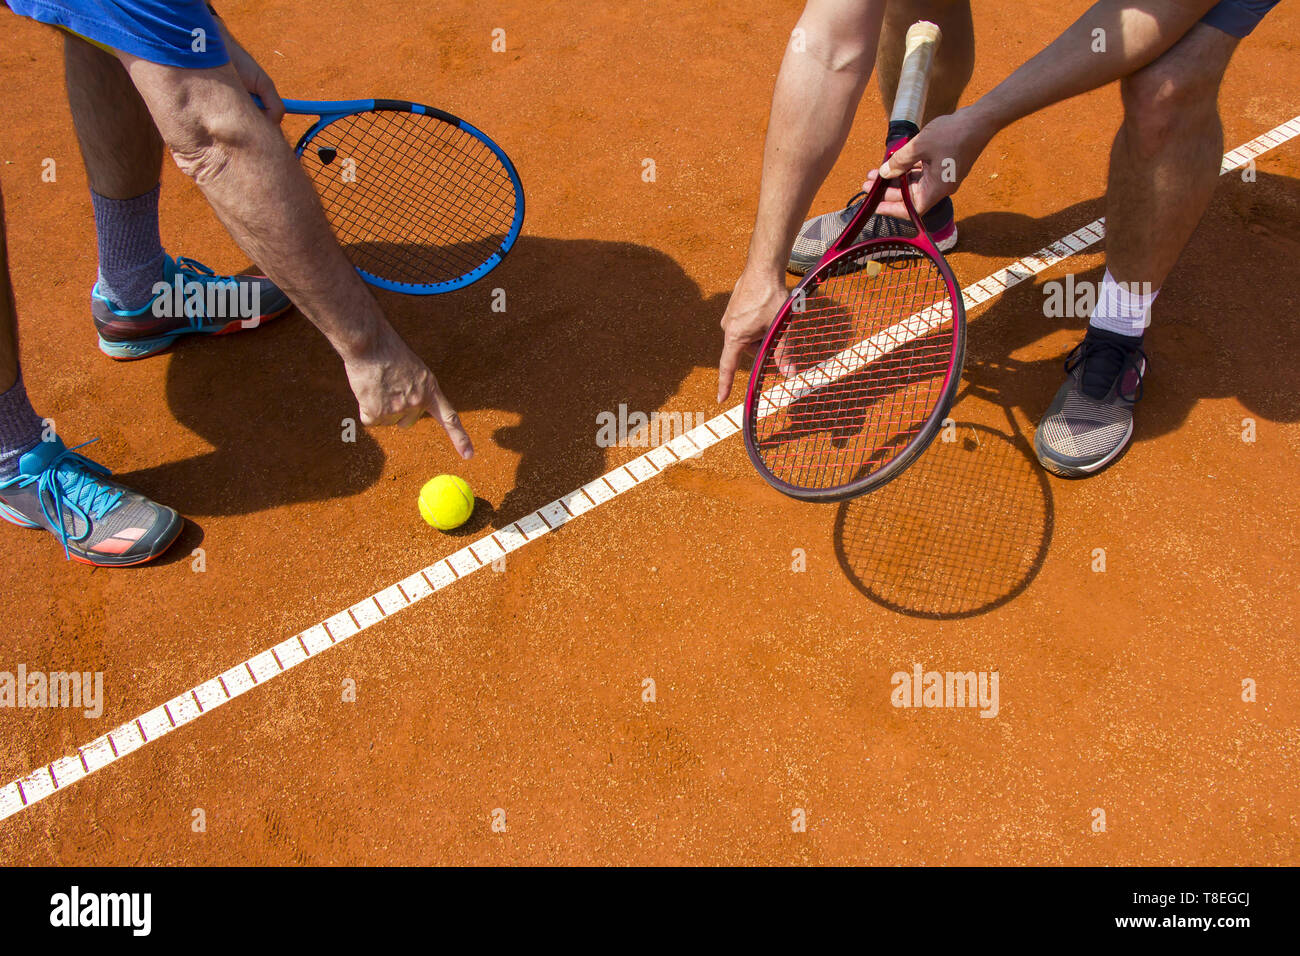 Tennis players shows the track on the tennis court Stock Photo